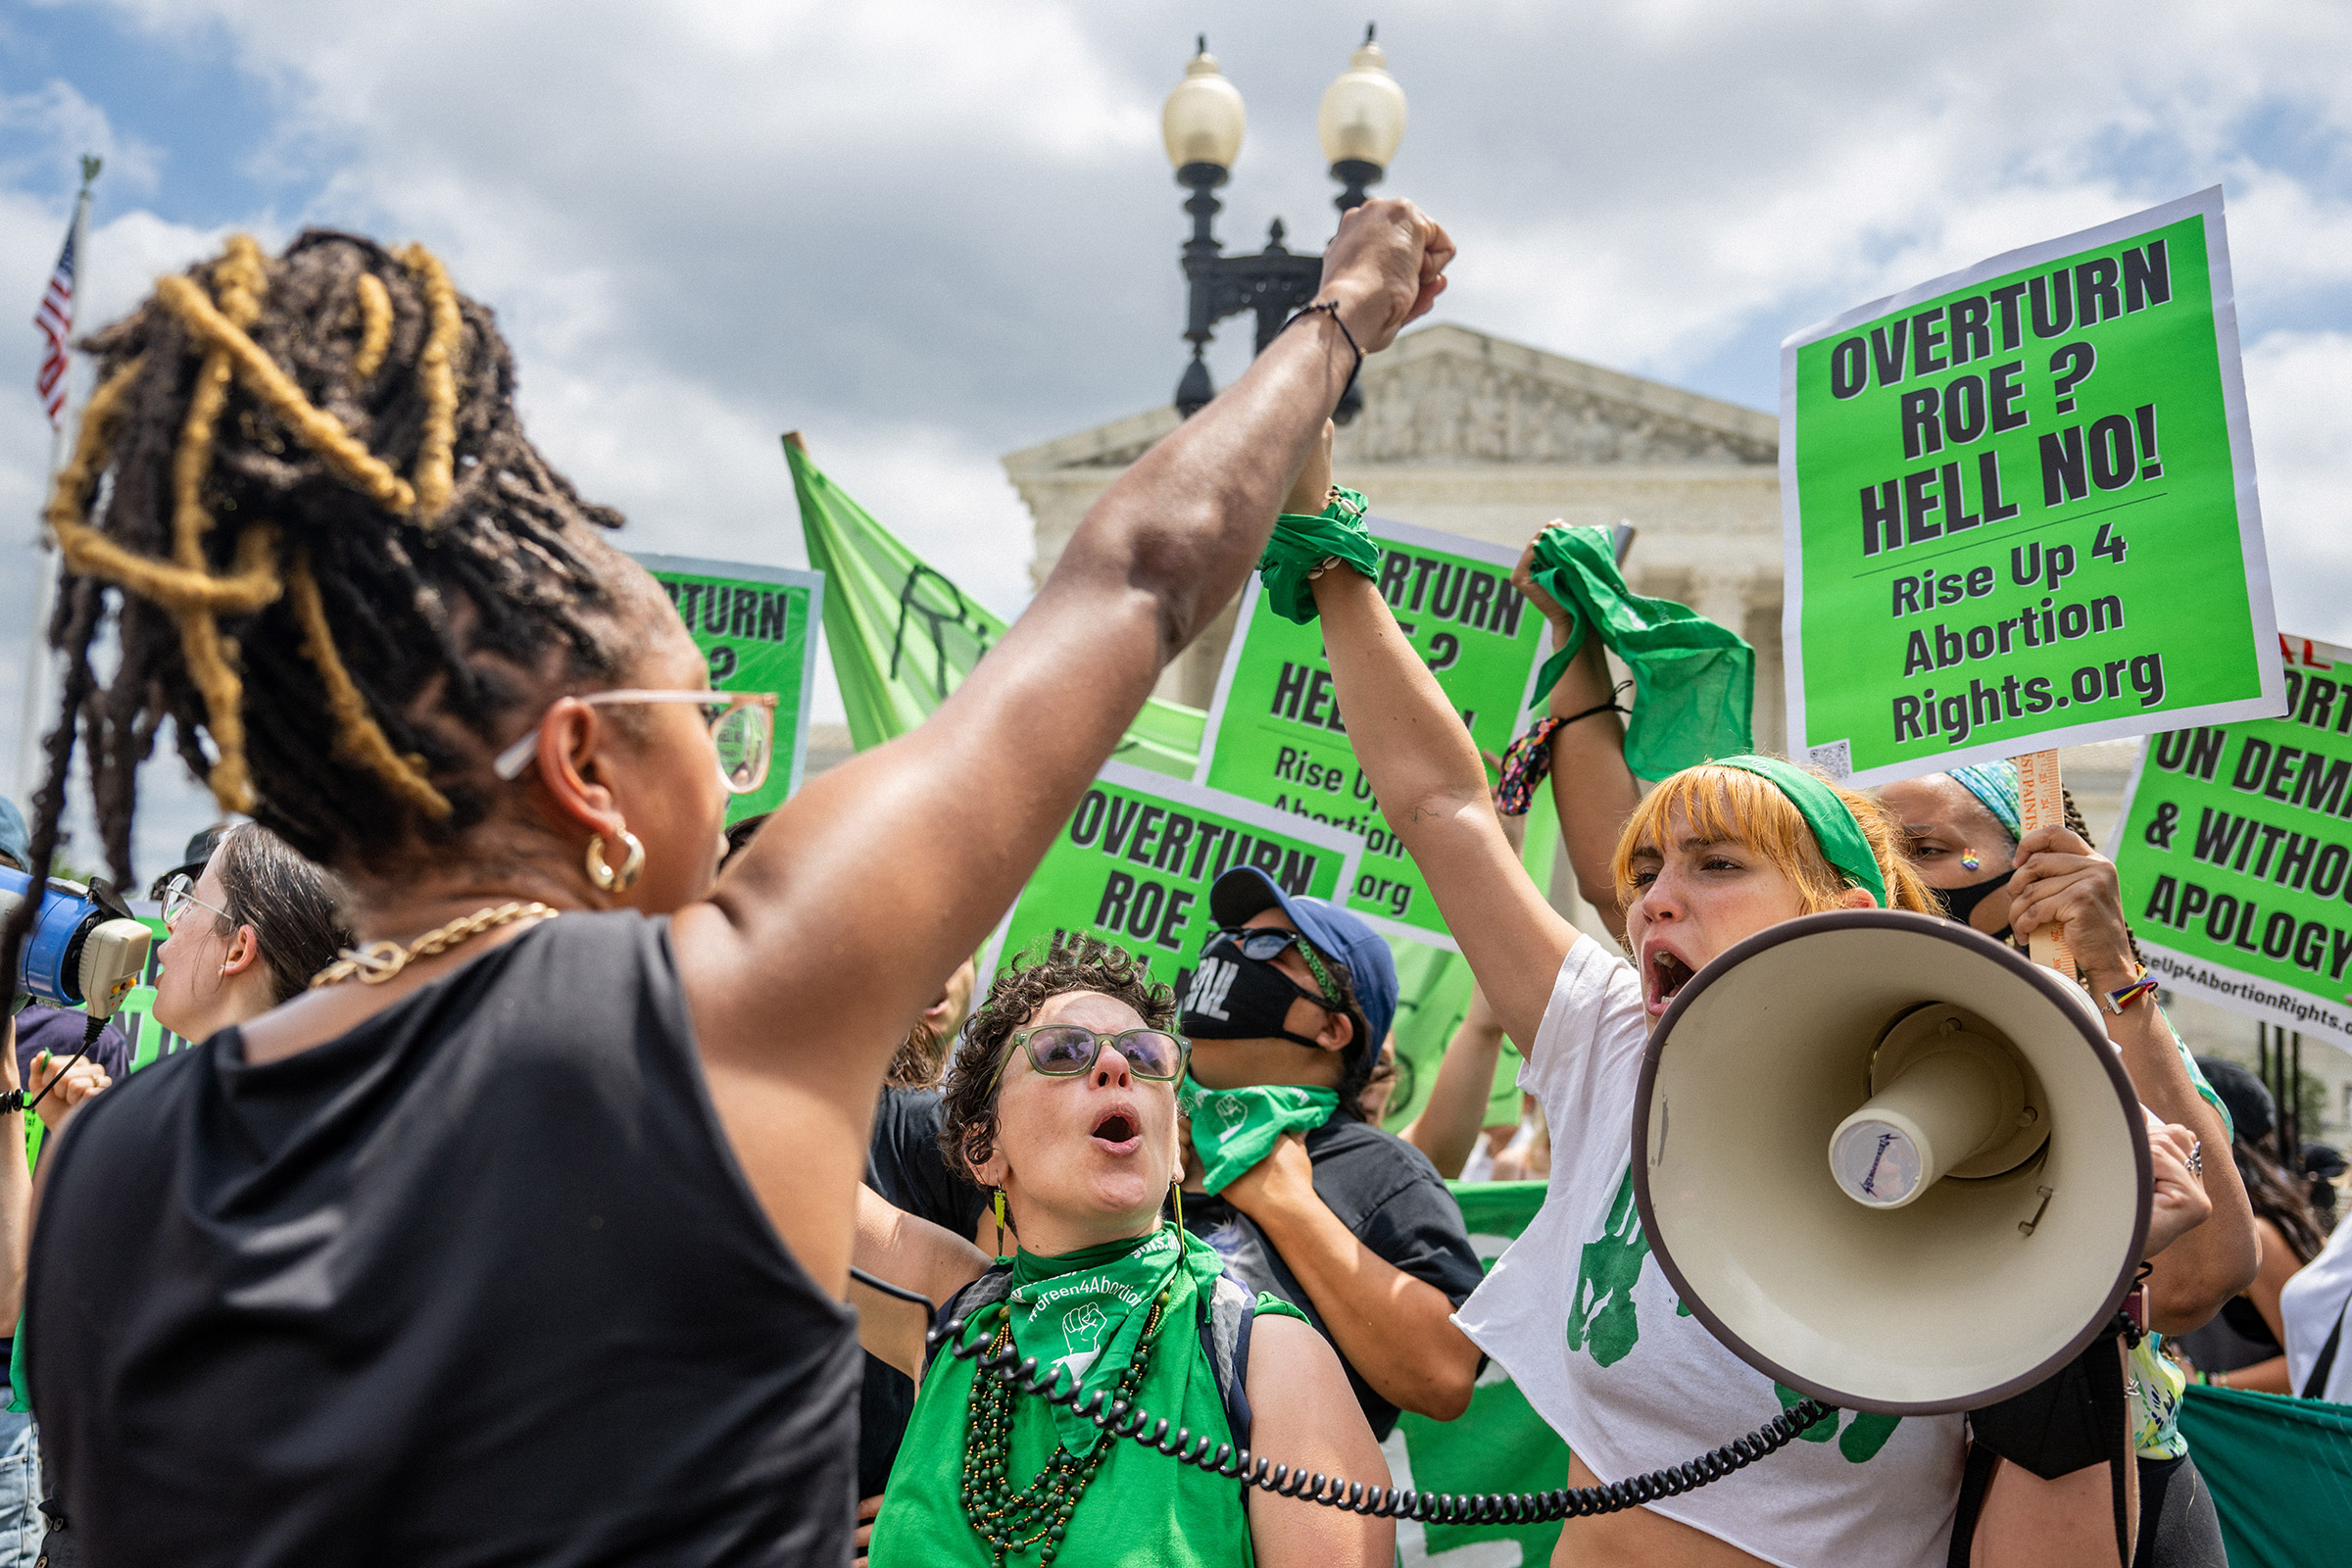 Abortion rights demonstrator Elizabeth White leads a chant in response to the Dobbs v Jackson Women's Health Organization ruling in front of the Supreme Court in Washington, D.C., on June 24, 2022.